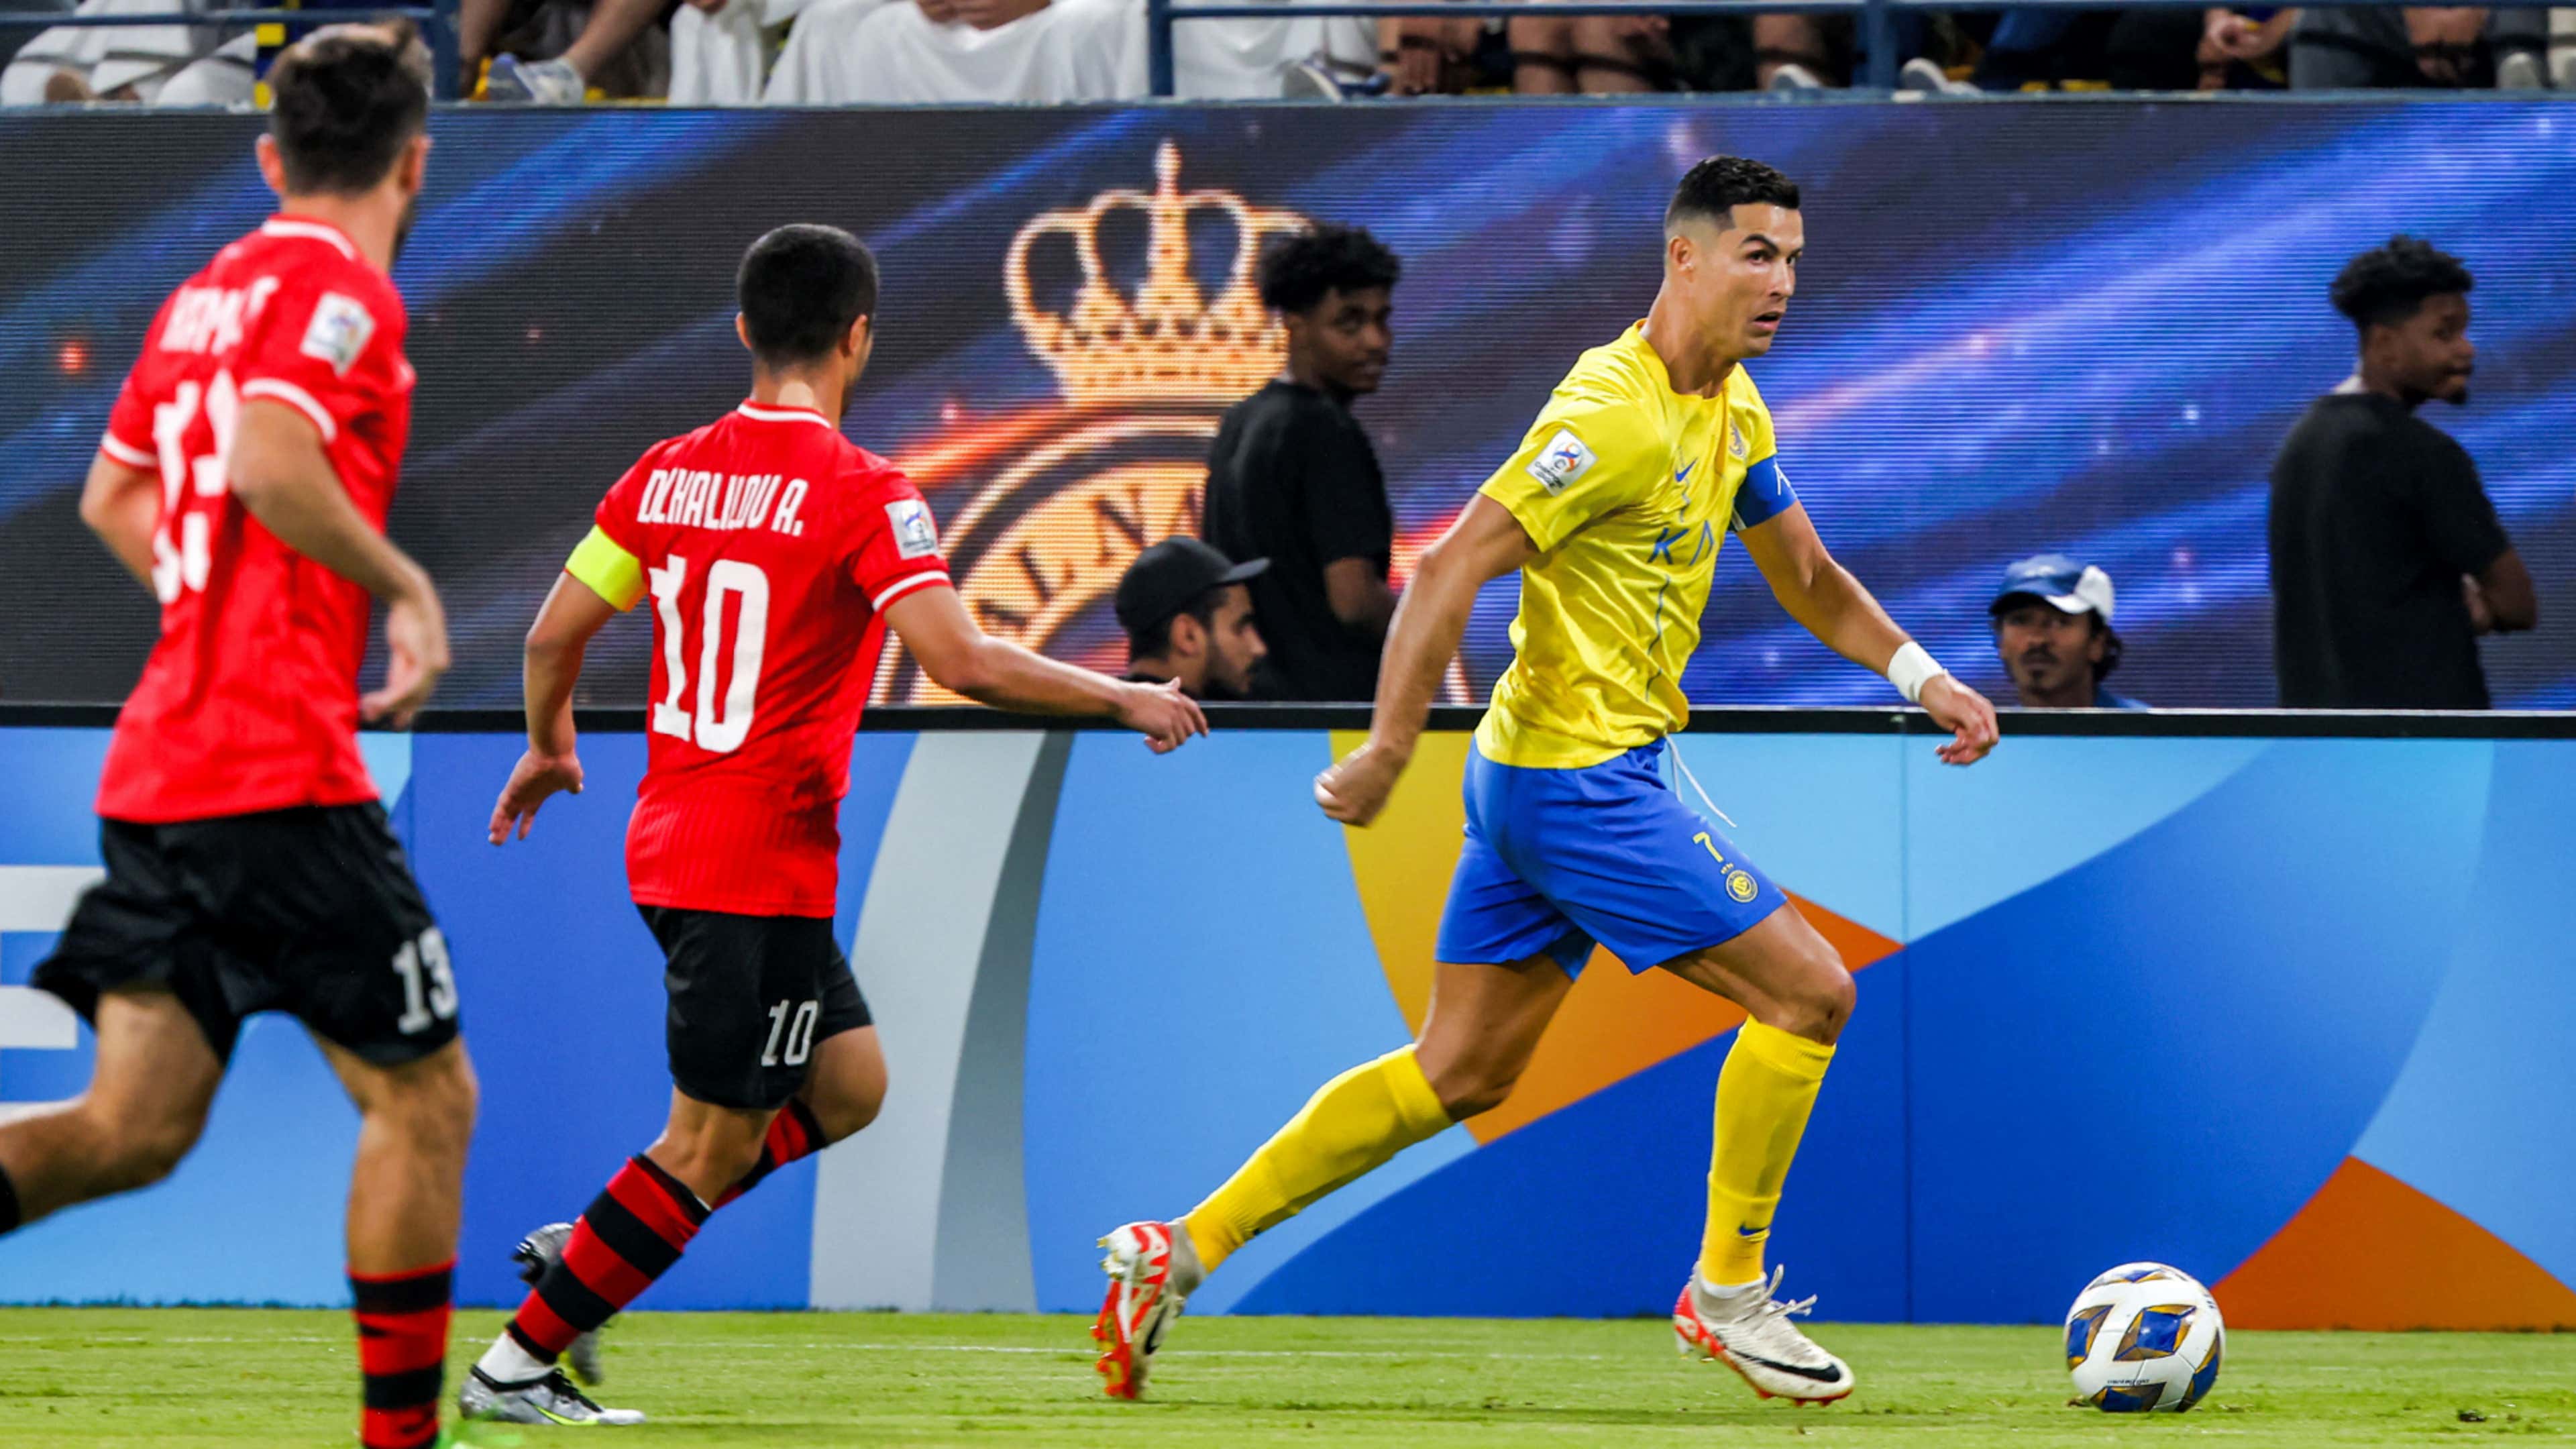 Ronaldo wins first title at Al Nassr with two goals in final - ESPN